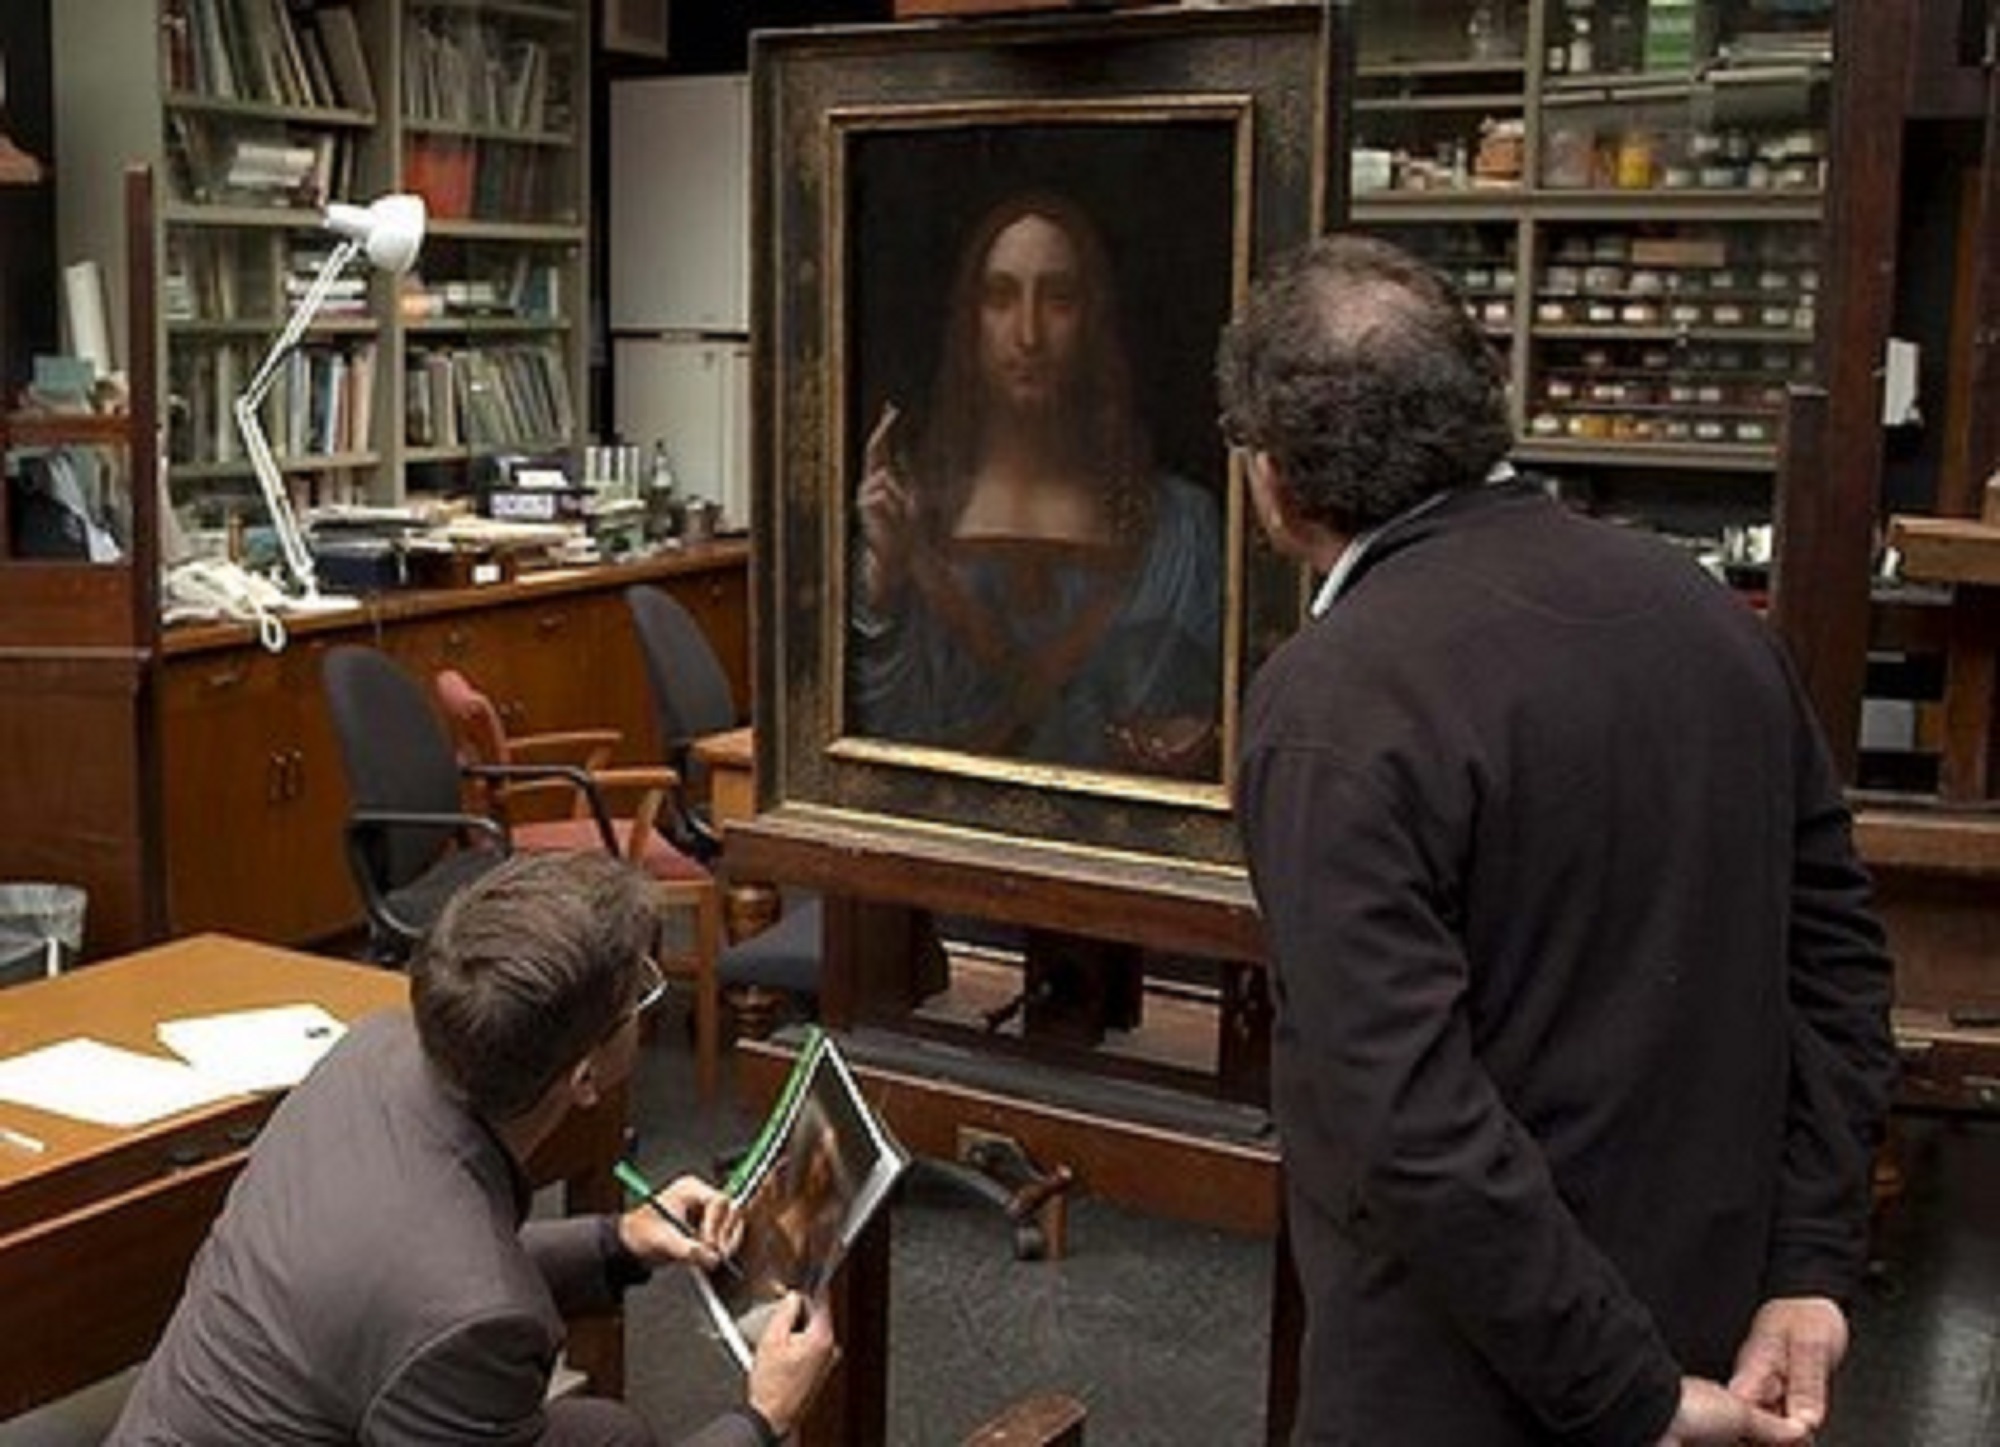 Right Robert Simon inspection of the Salvator Mundi at the National Gallery (2011).